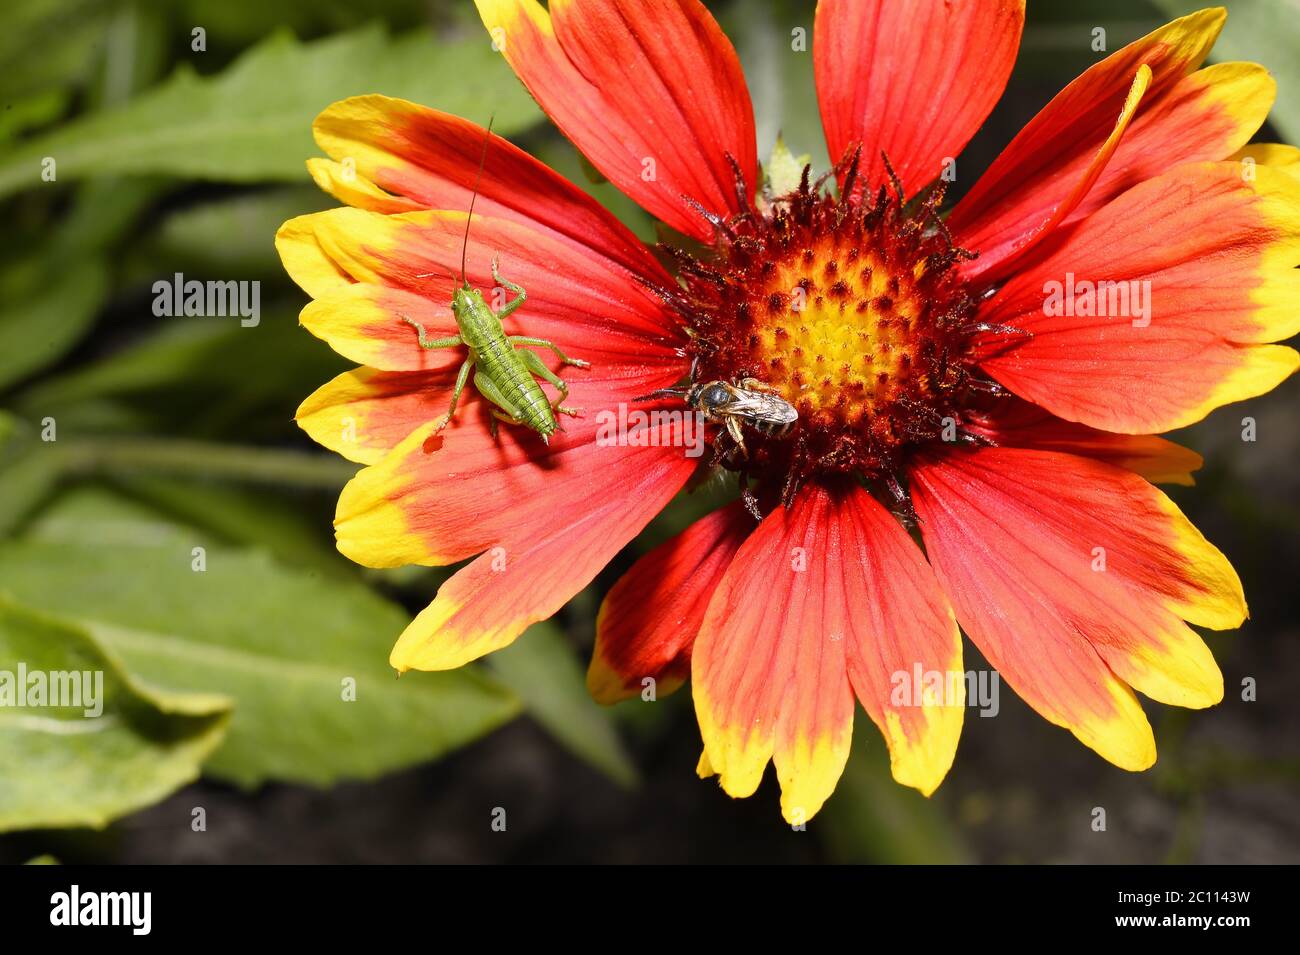 Red Helenium flower close-up with a grasshopper sitting on it Stock Photo